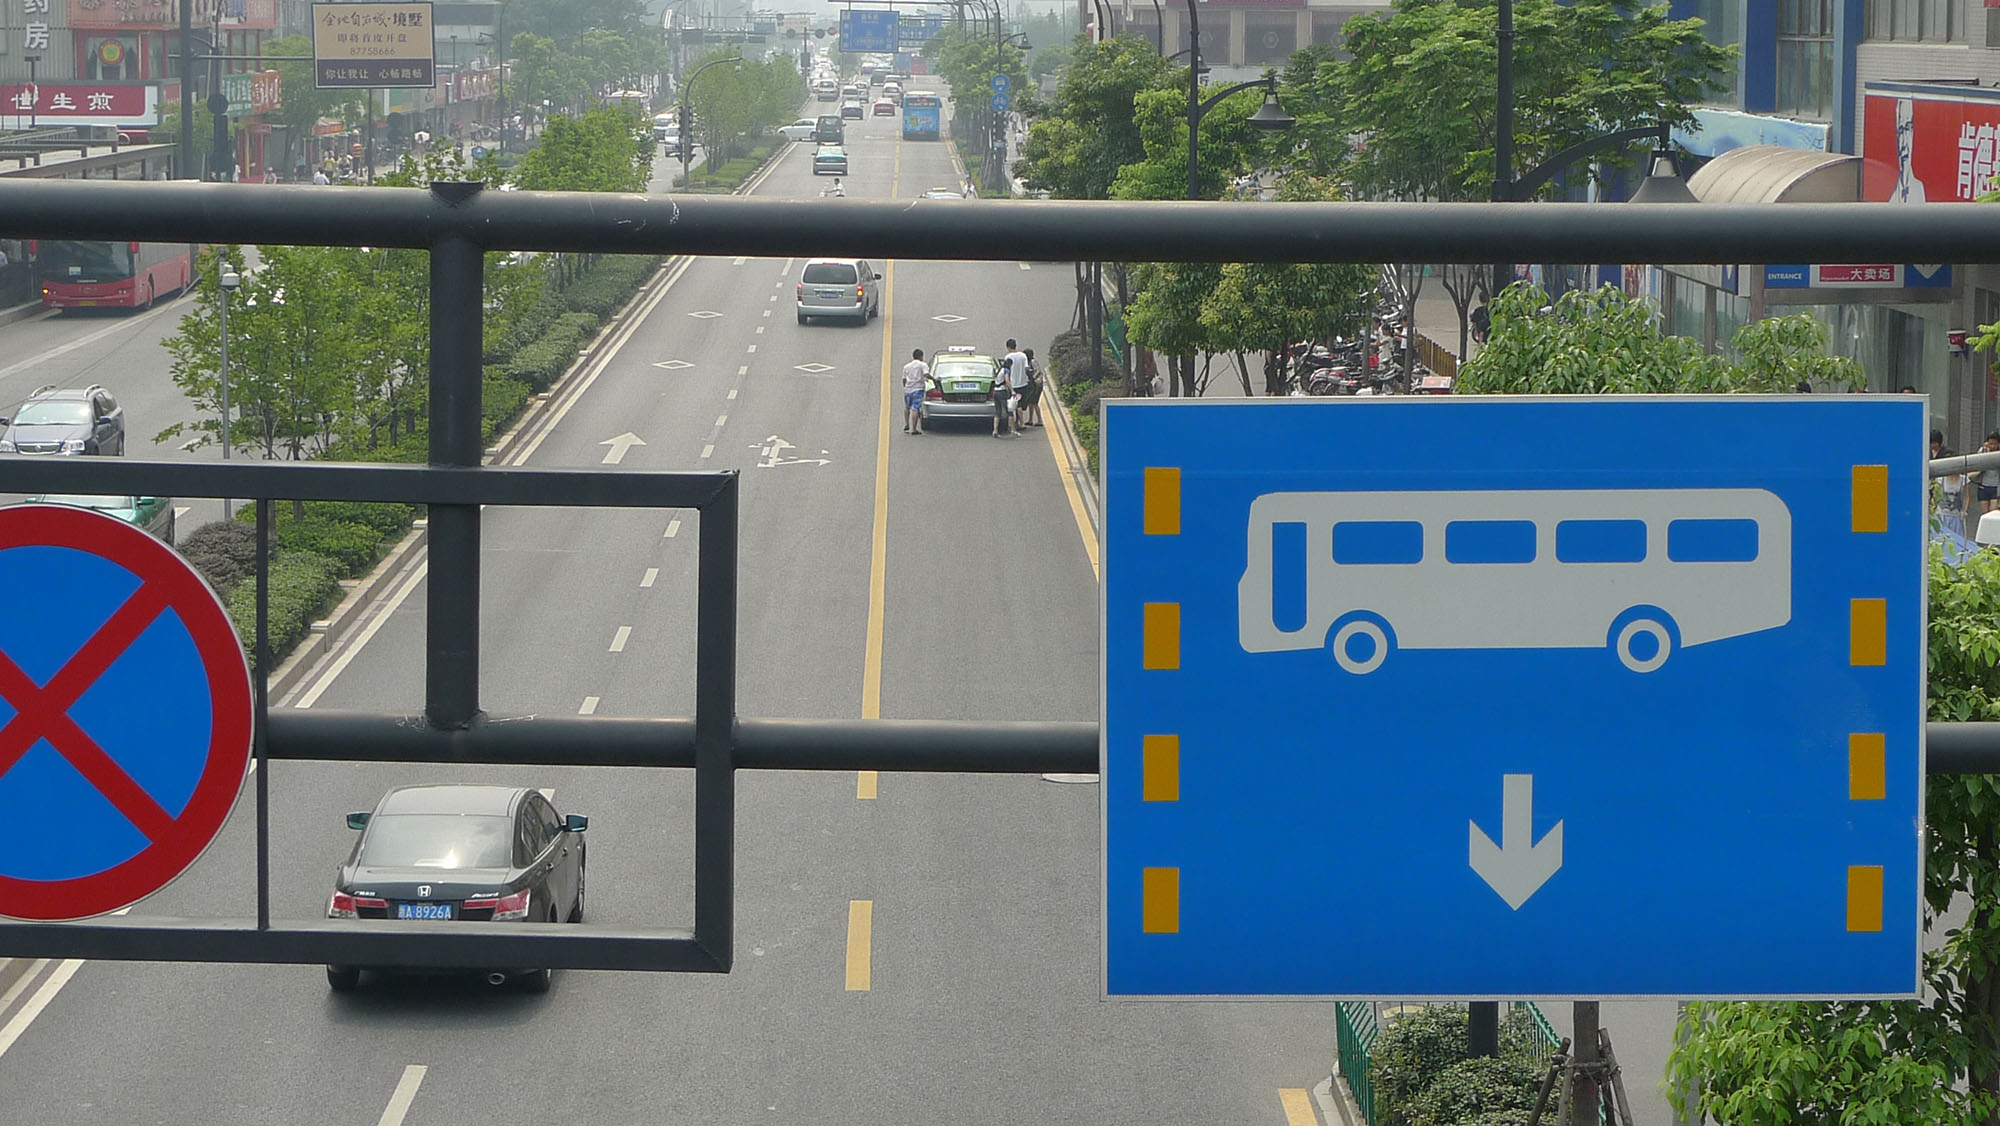 Fig. 22.21 Curbside bus lanes often fail due to traffic congestion and poor enforcement (Hangzhou, China).